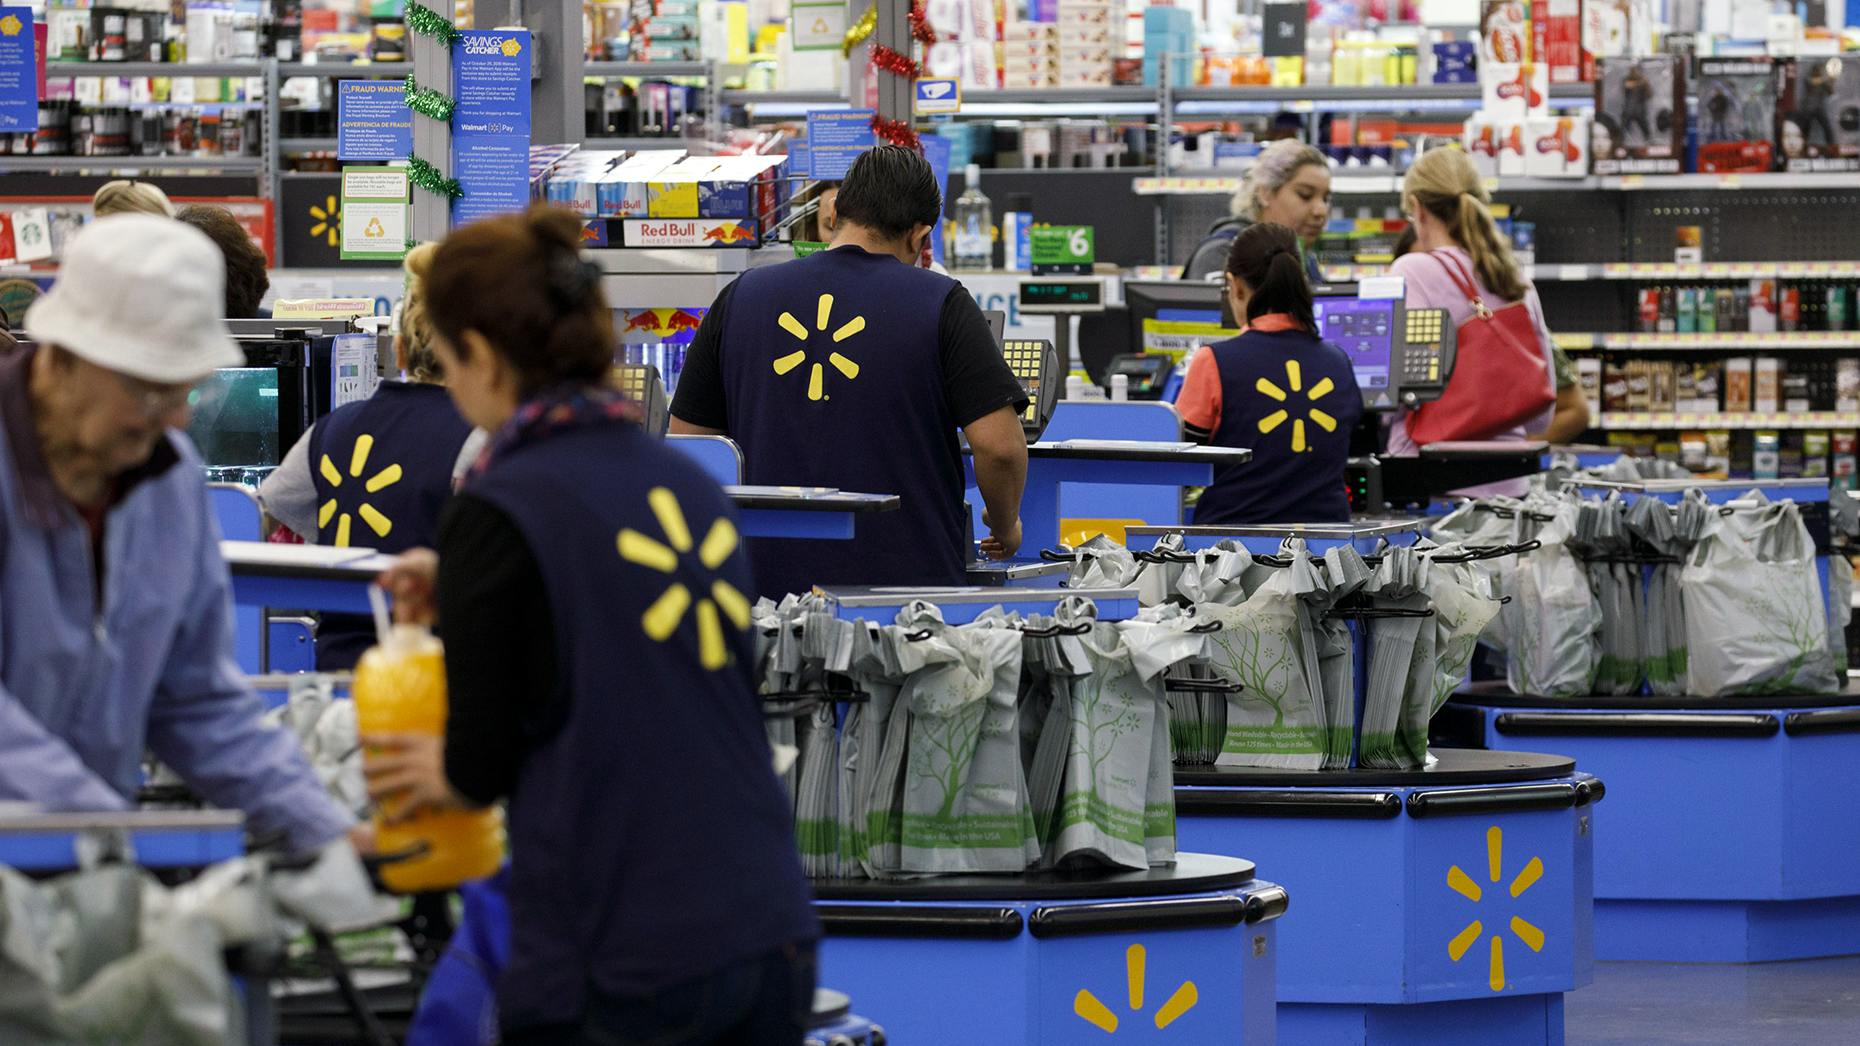 Walmart Plans to Offer Buy Now, Pay Later Loans Through its Fintech Venture  — The Information